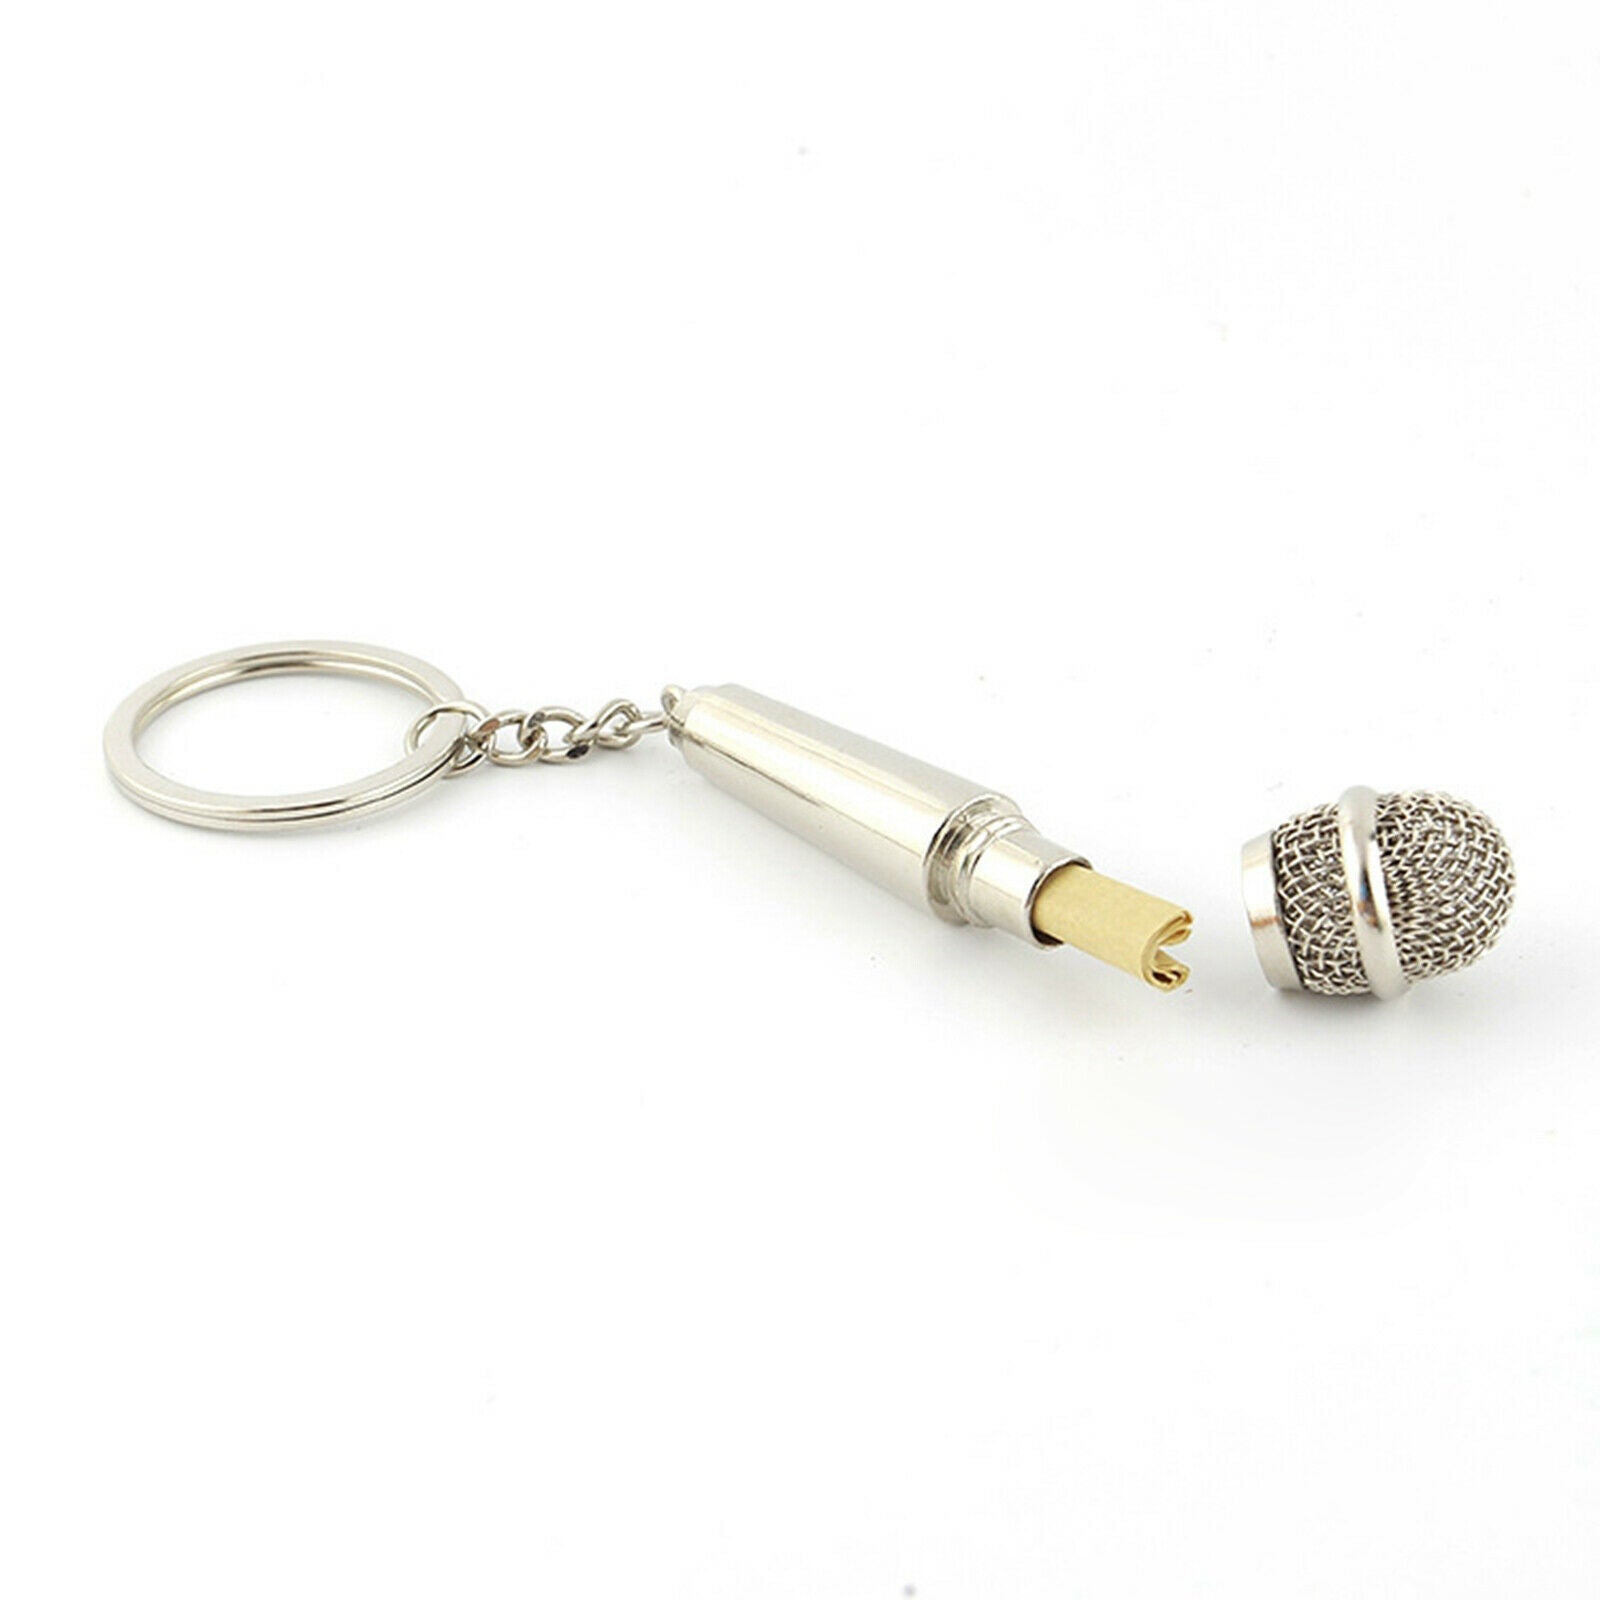 Fashion Cute Punk Music Microphone Keychain Hanging for Bag Key Ring Gift